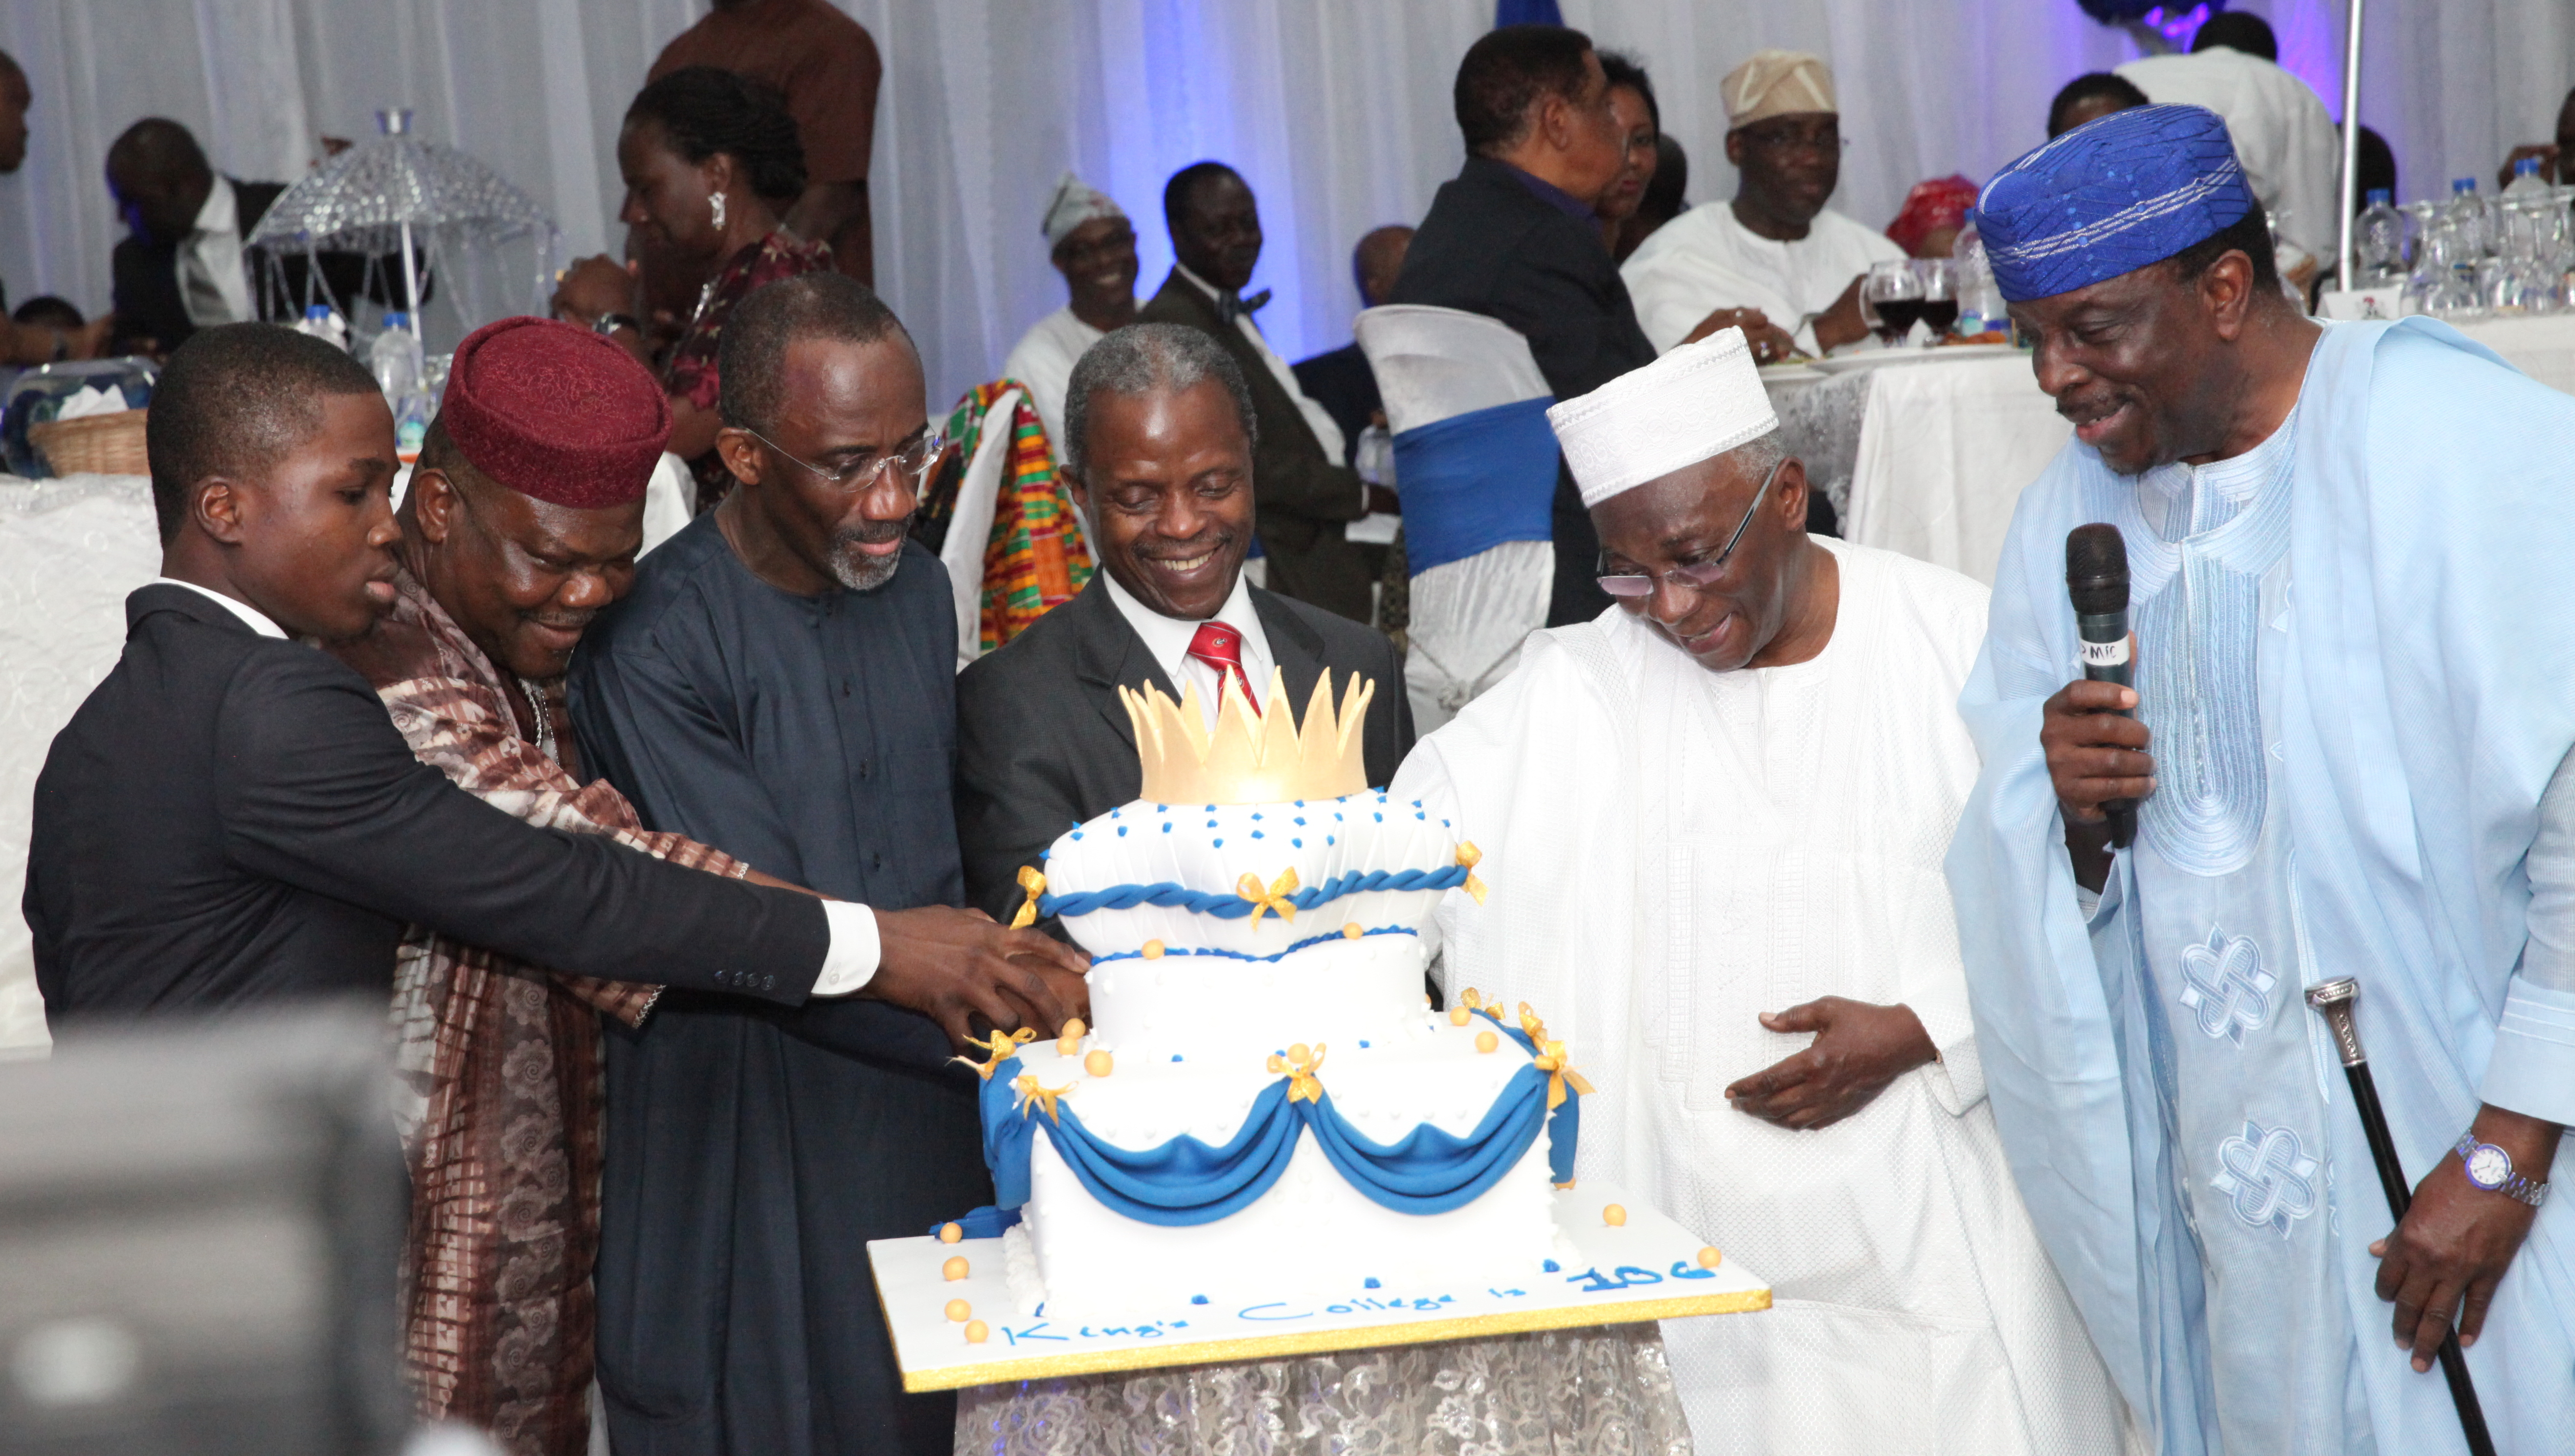 VP Osinbajo Attends The 106th Anniversary Annual Dinner Of King’s College Old Boys’ Association (KCOBA) On 19/09/2015